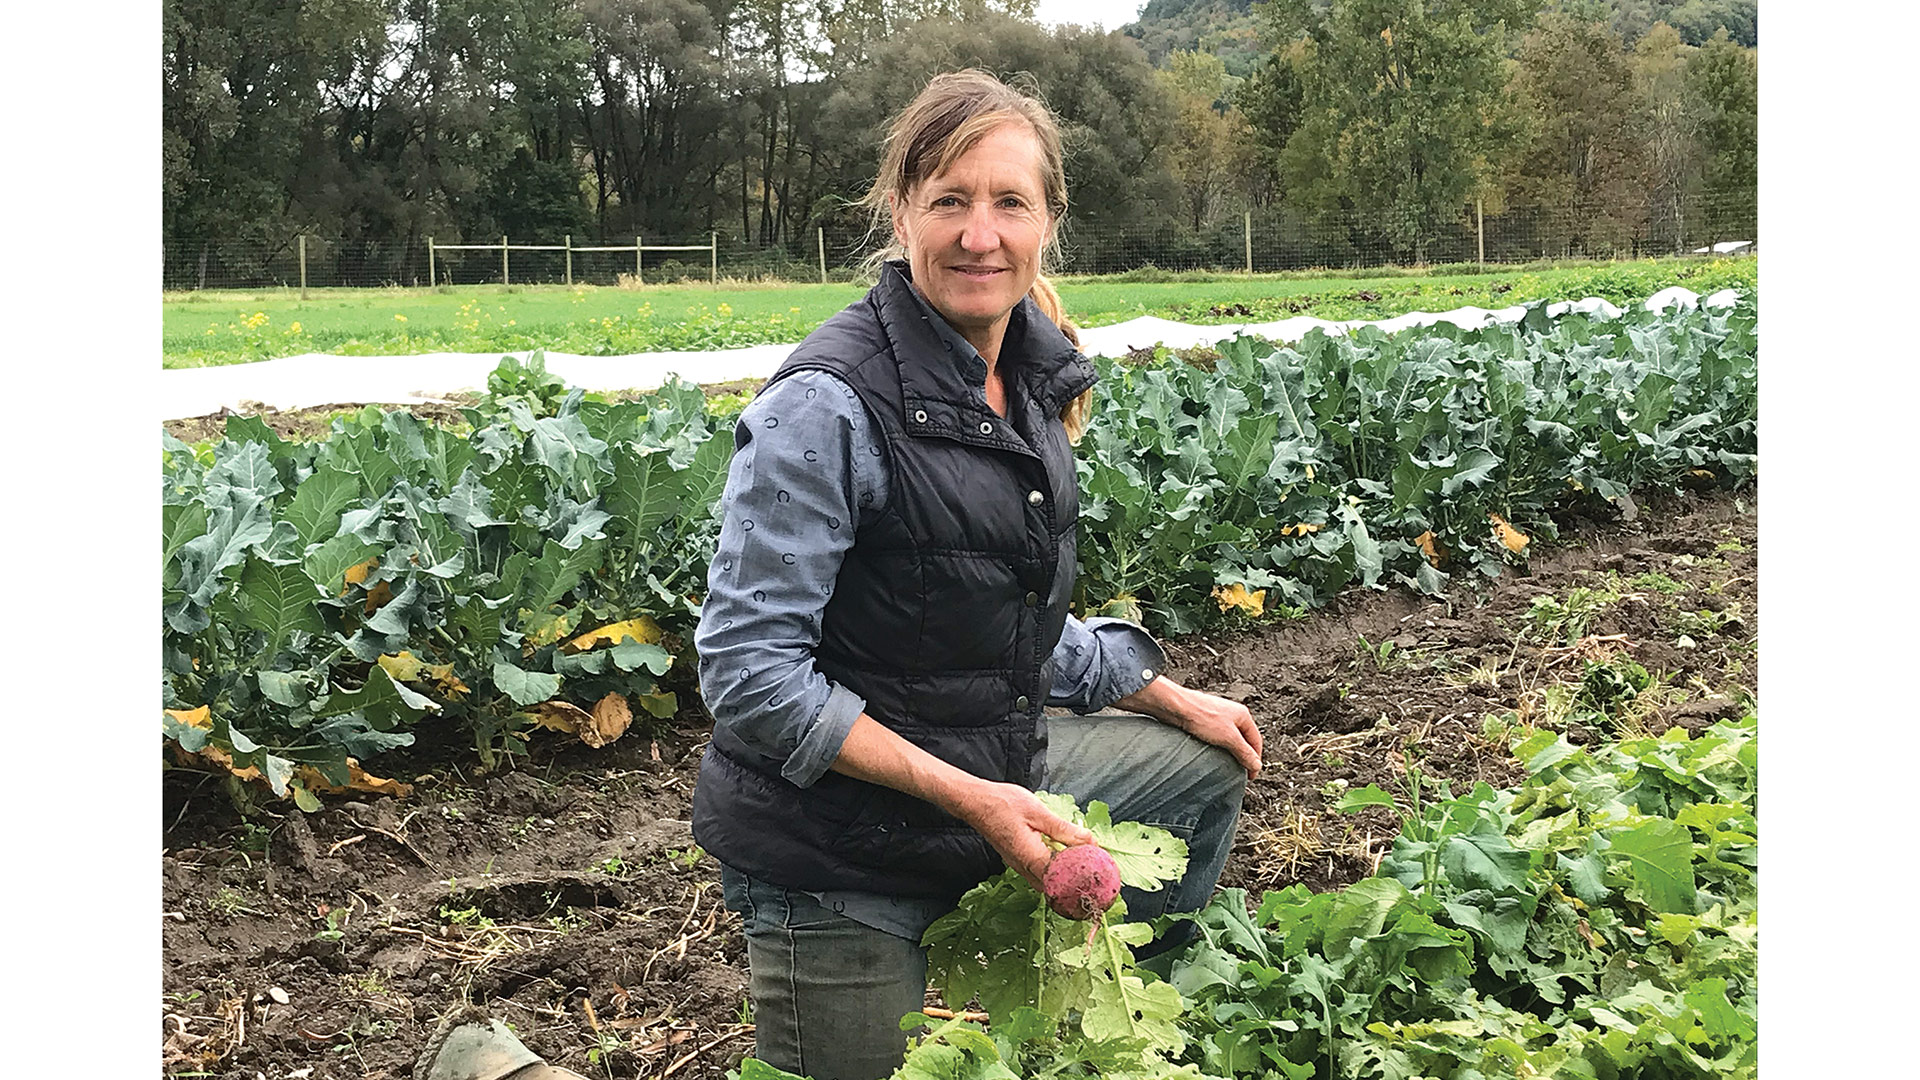 Elizabeth Keen’s impact extends beyond her own farm to broader efforts like the Collaborative Regional Alliance for Farmer Training.